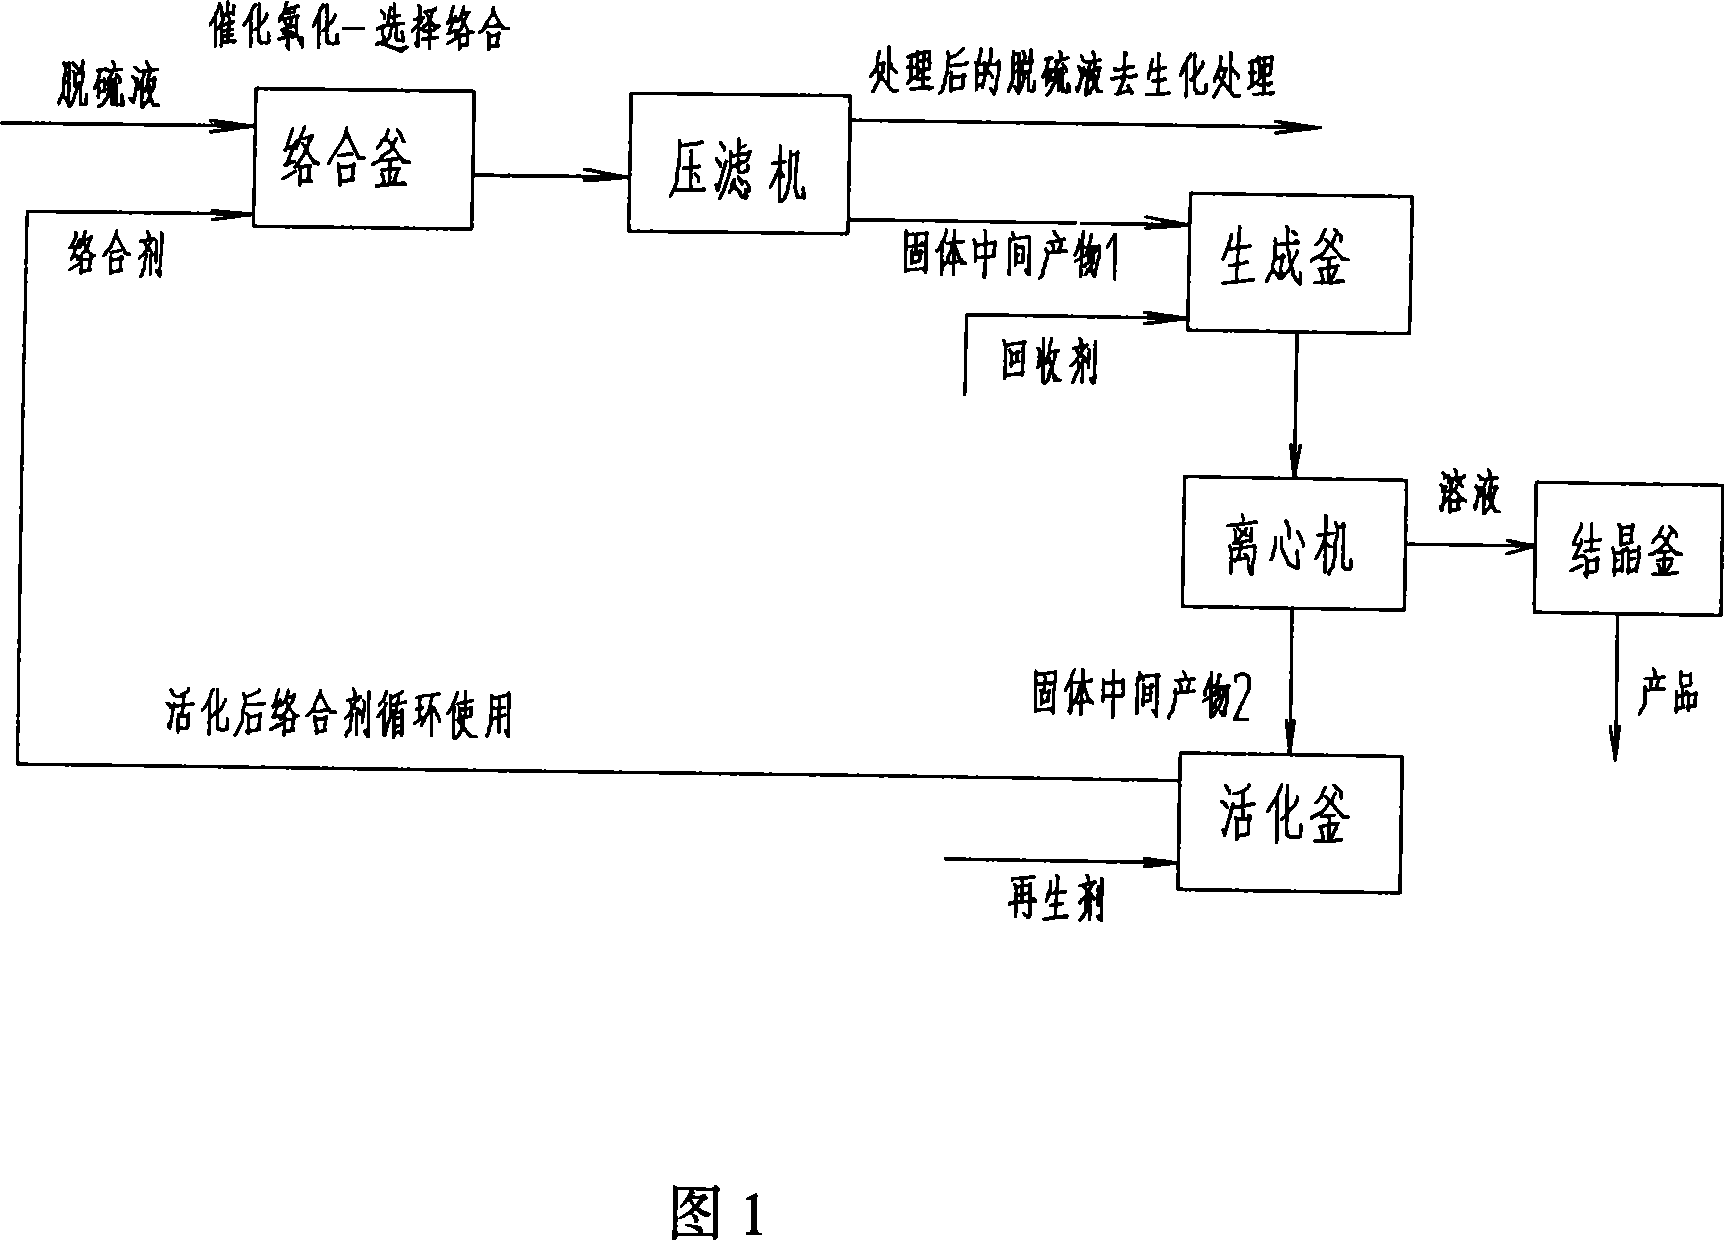 Process technique for discharged doctor solution of HPF desulfurization system of coke-oven plant